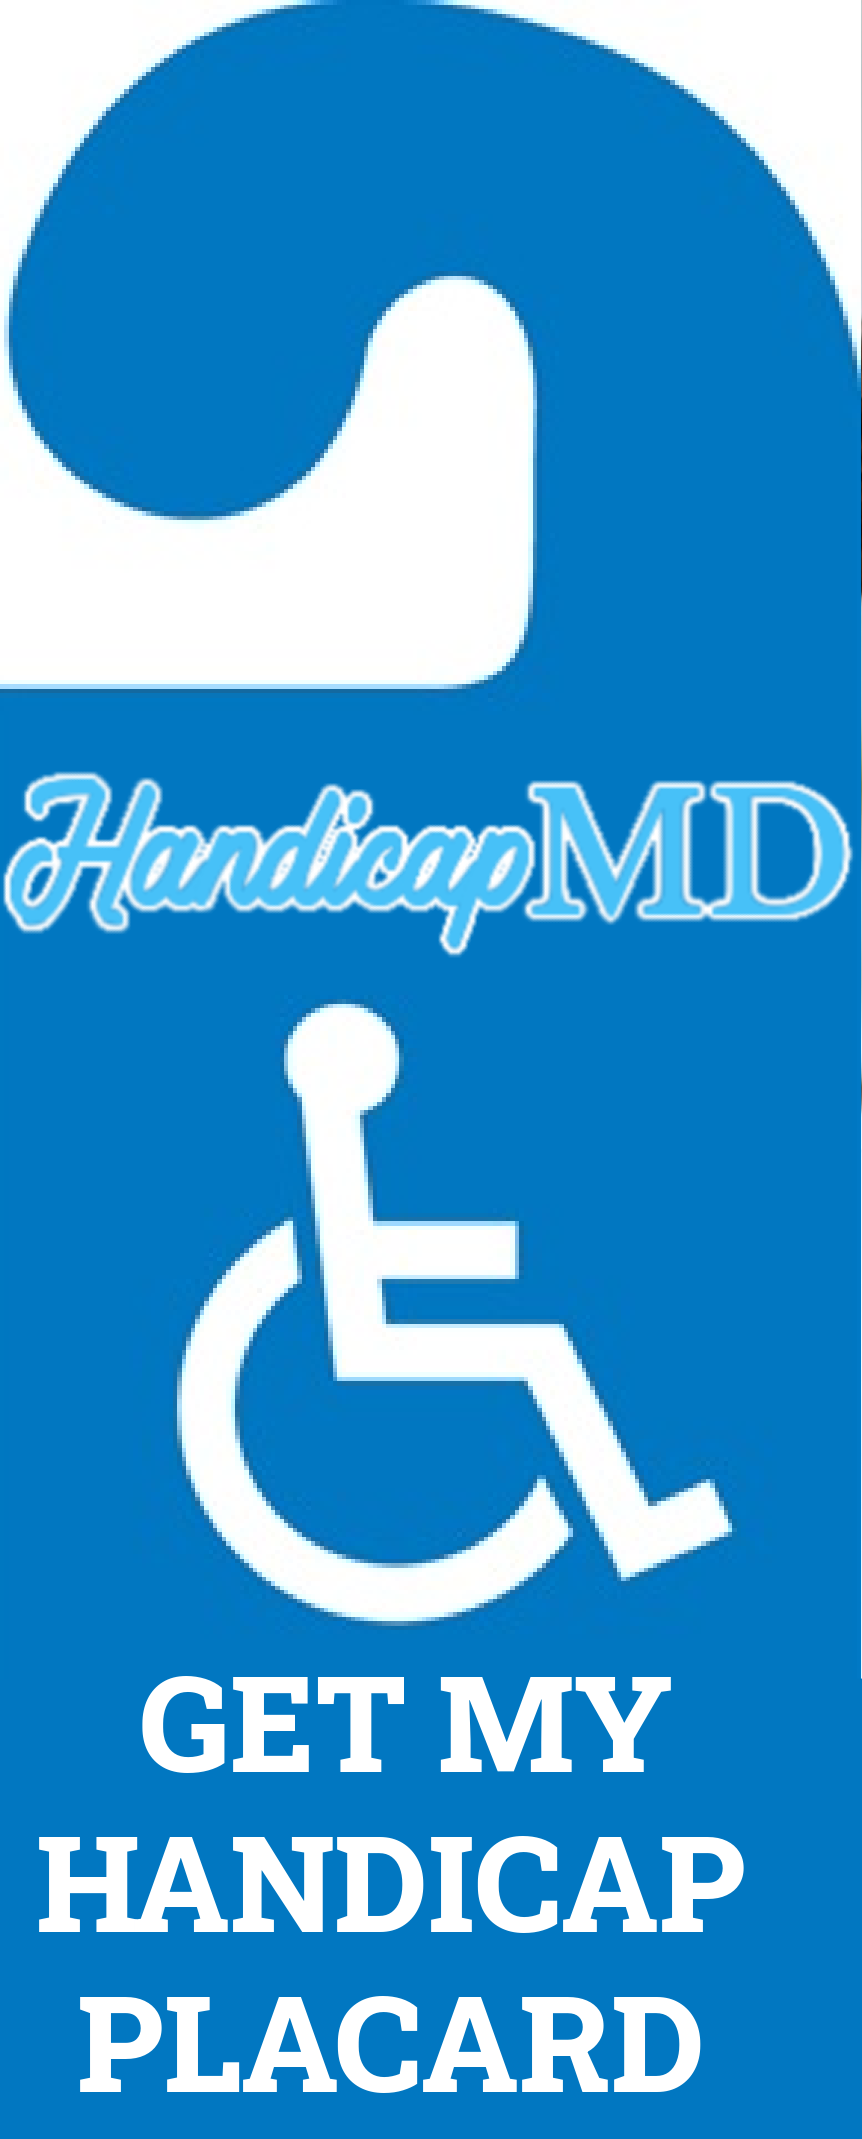 When Should I Stop Using My Disabled Parking Permit?